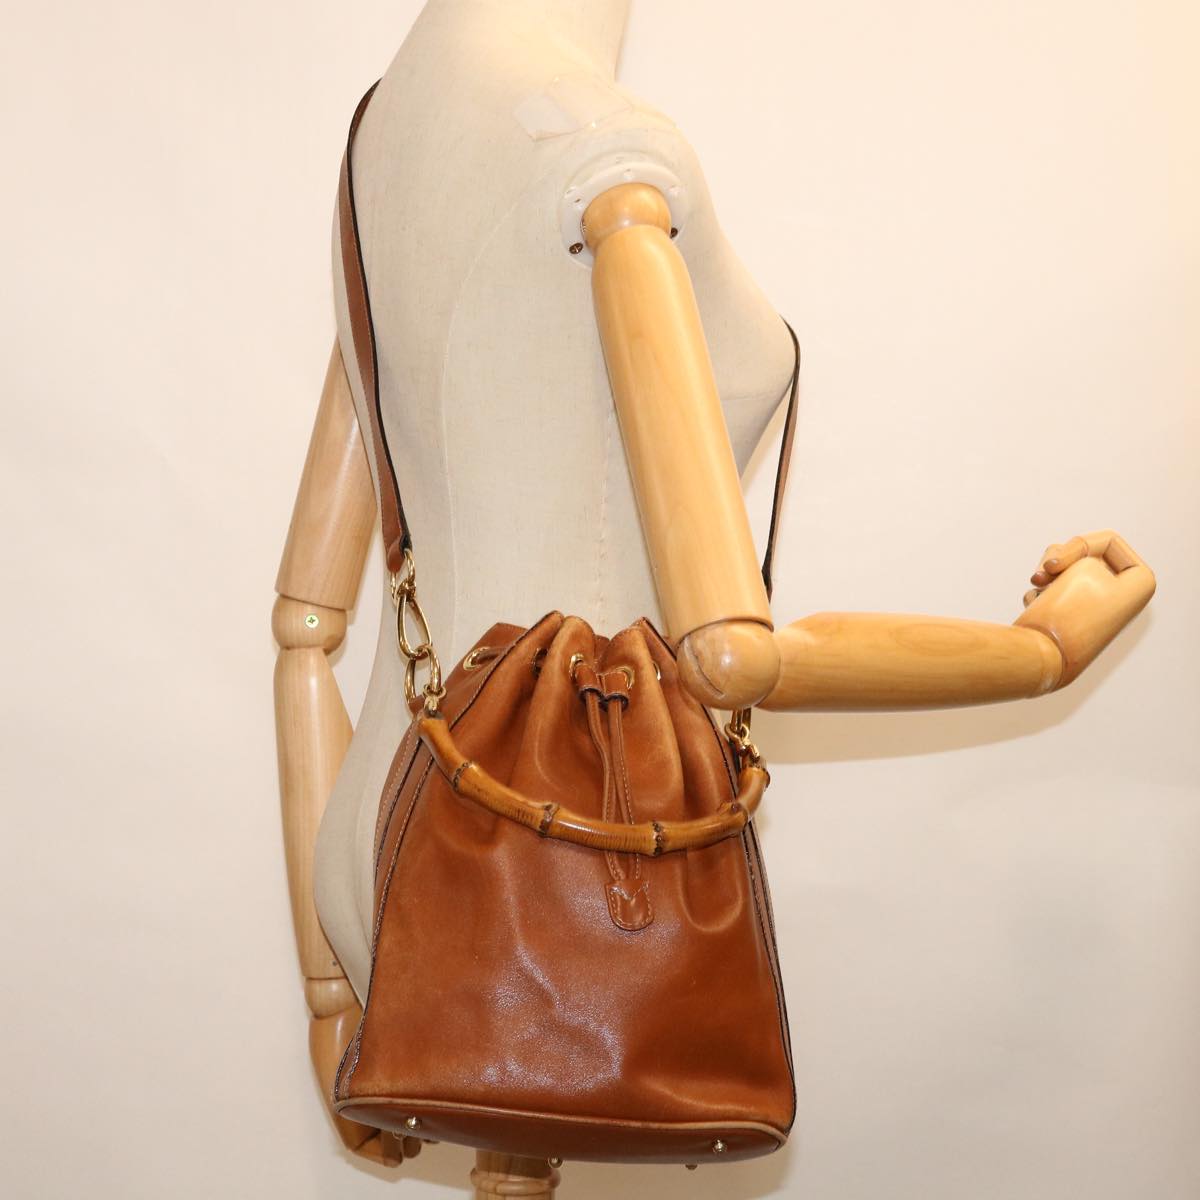 GUCCI Bamboo Shoulder Bag Leather 2way Brown Auth 70147